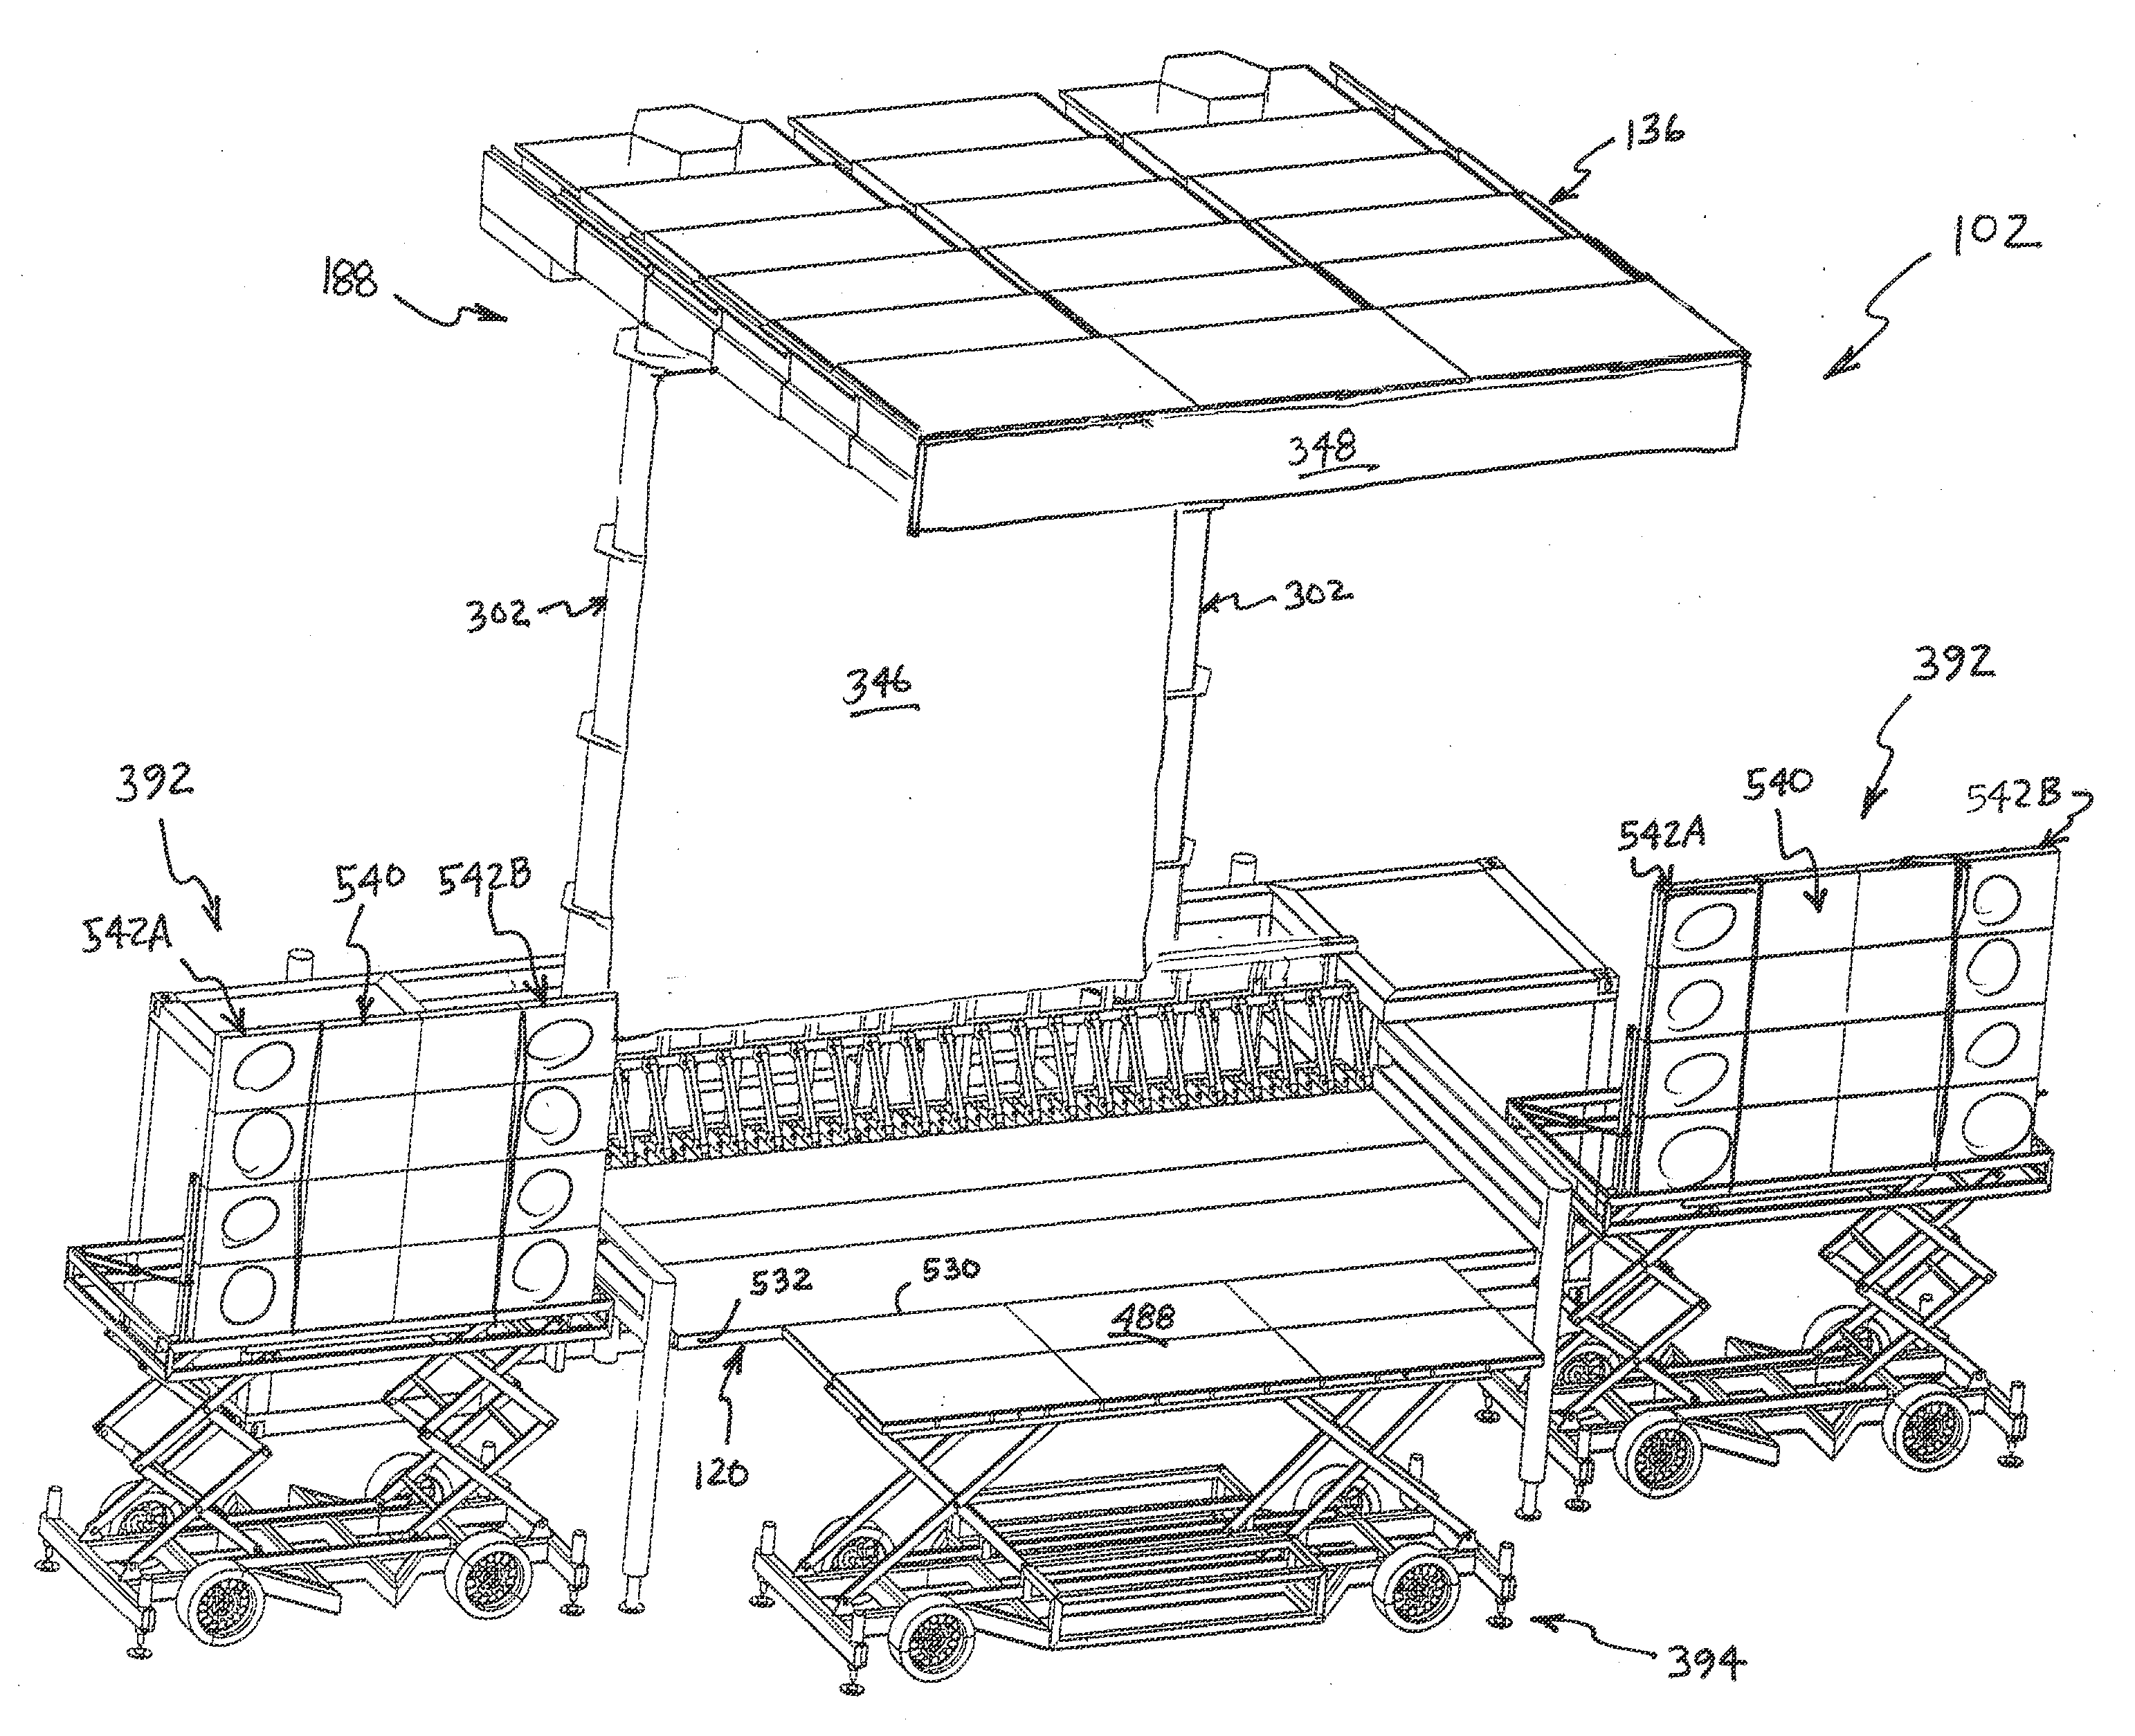 Rapidly deployable buggies for a stage system